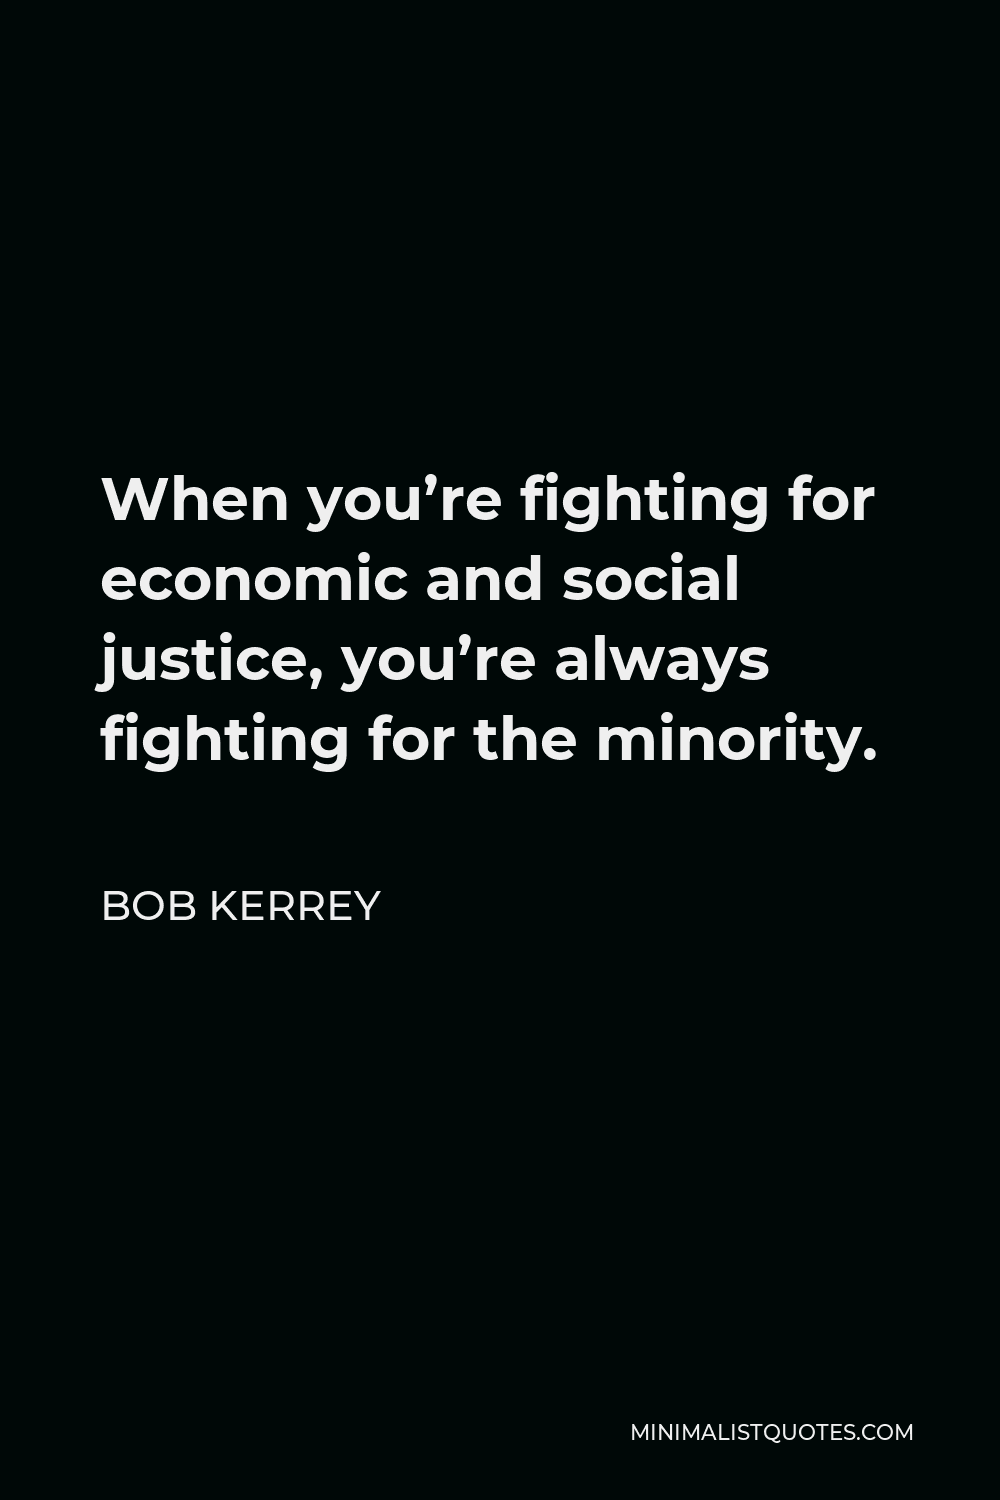 Bob Kerrey Quote - When you’re fighting for economic and social justice, you’re always fighting for the minority.